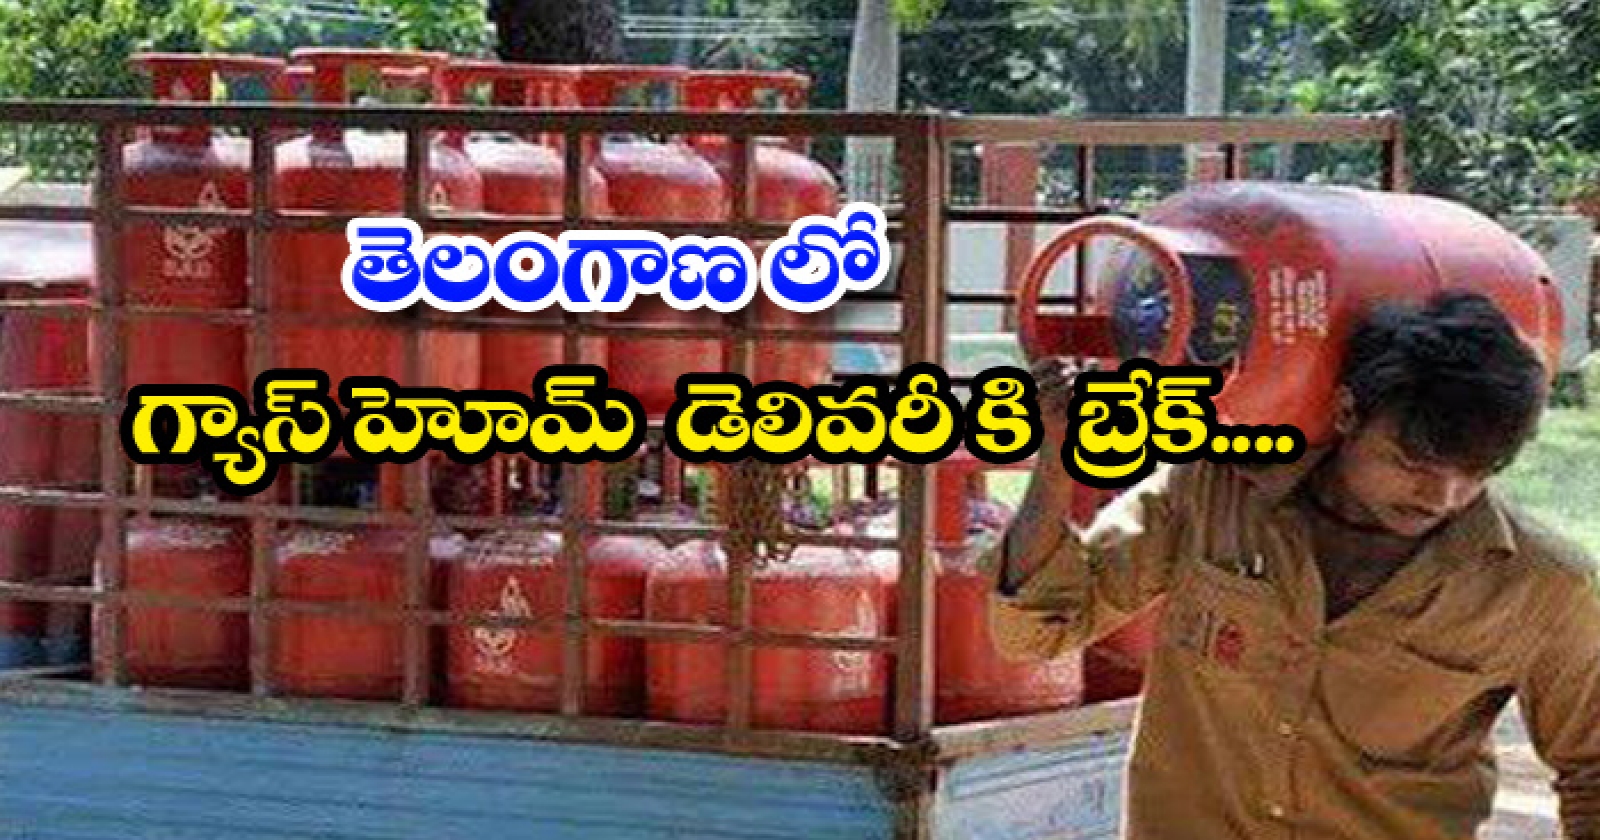  Lpg Dealers Stopped Gas Home Delivery Corona Lockdown, Gas Home Delivery ,lpg Dealers, Telangana Lockdown, Covid Cases-TeluguStop.com